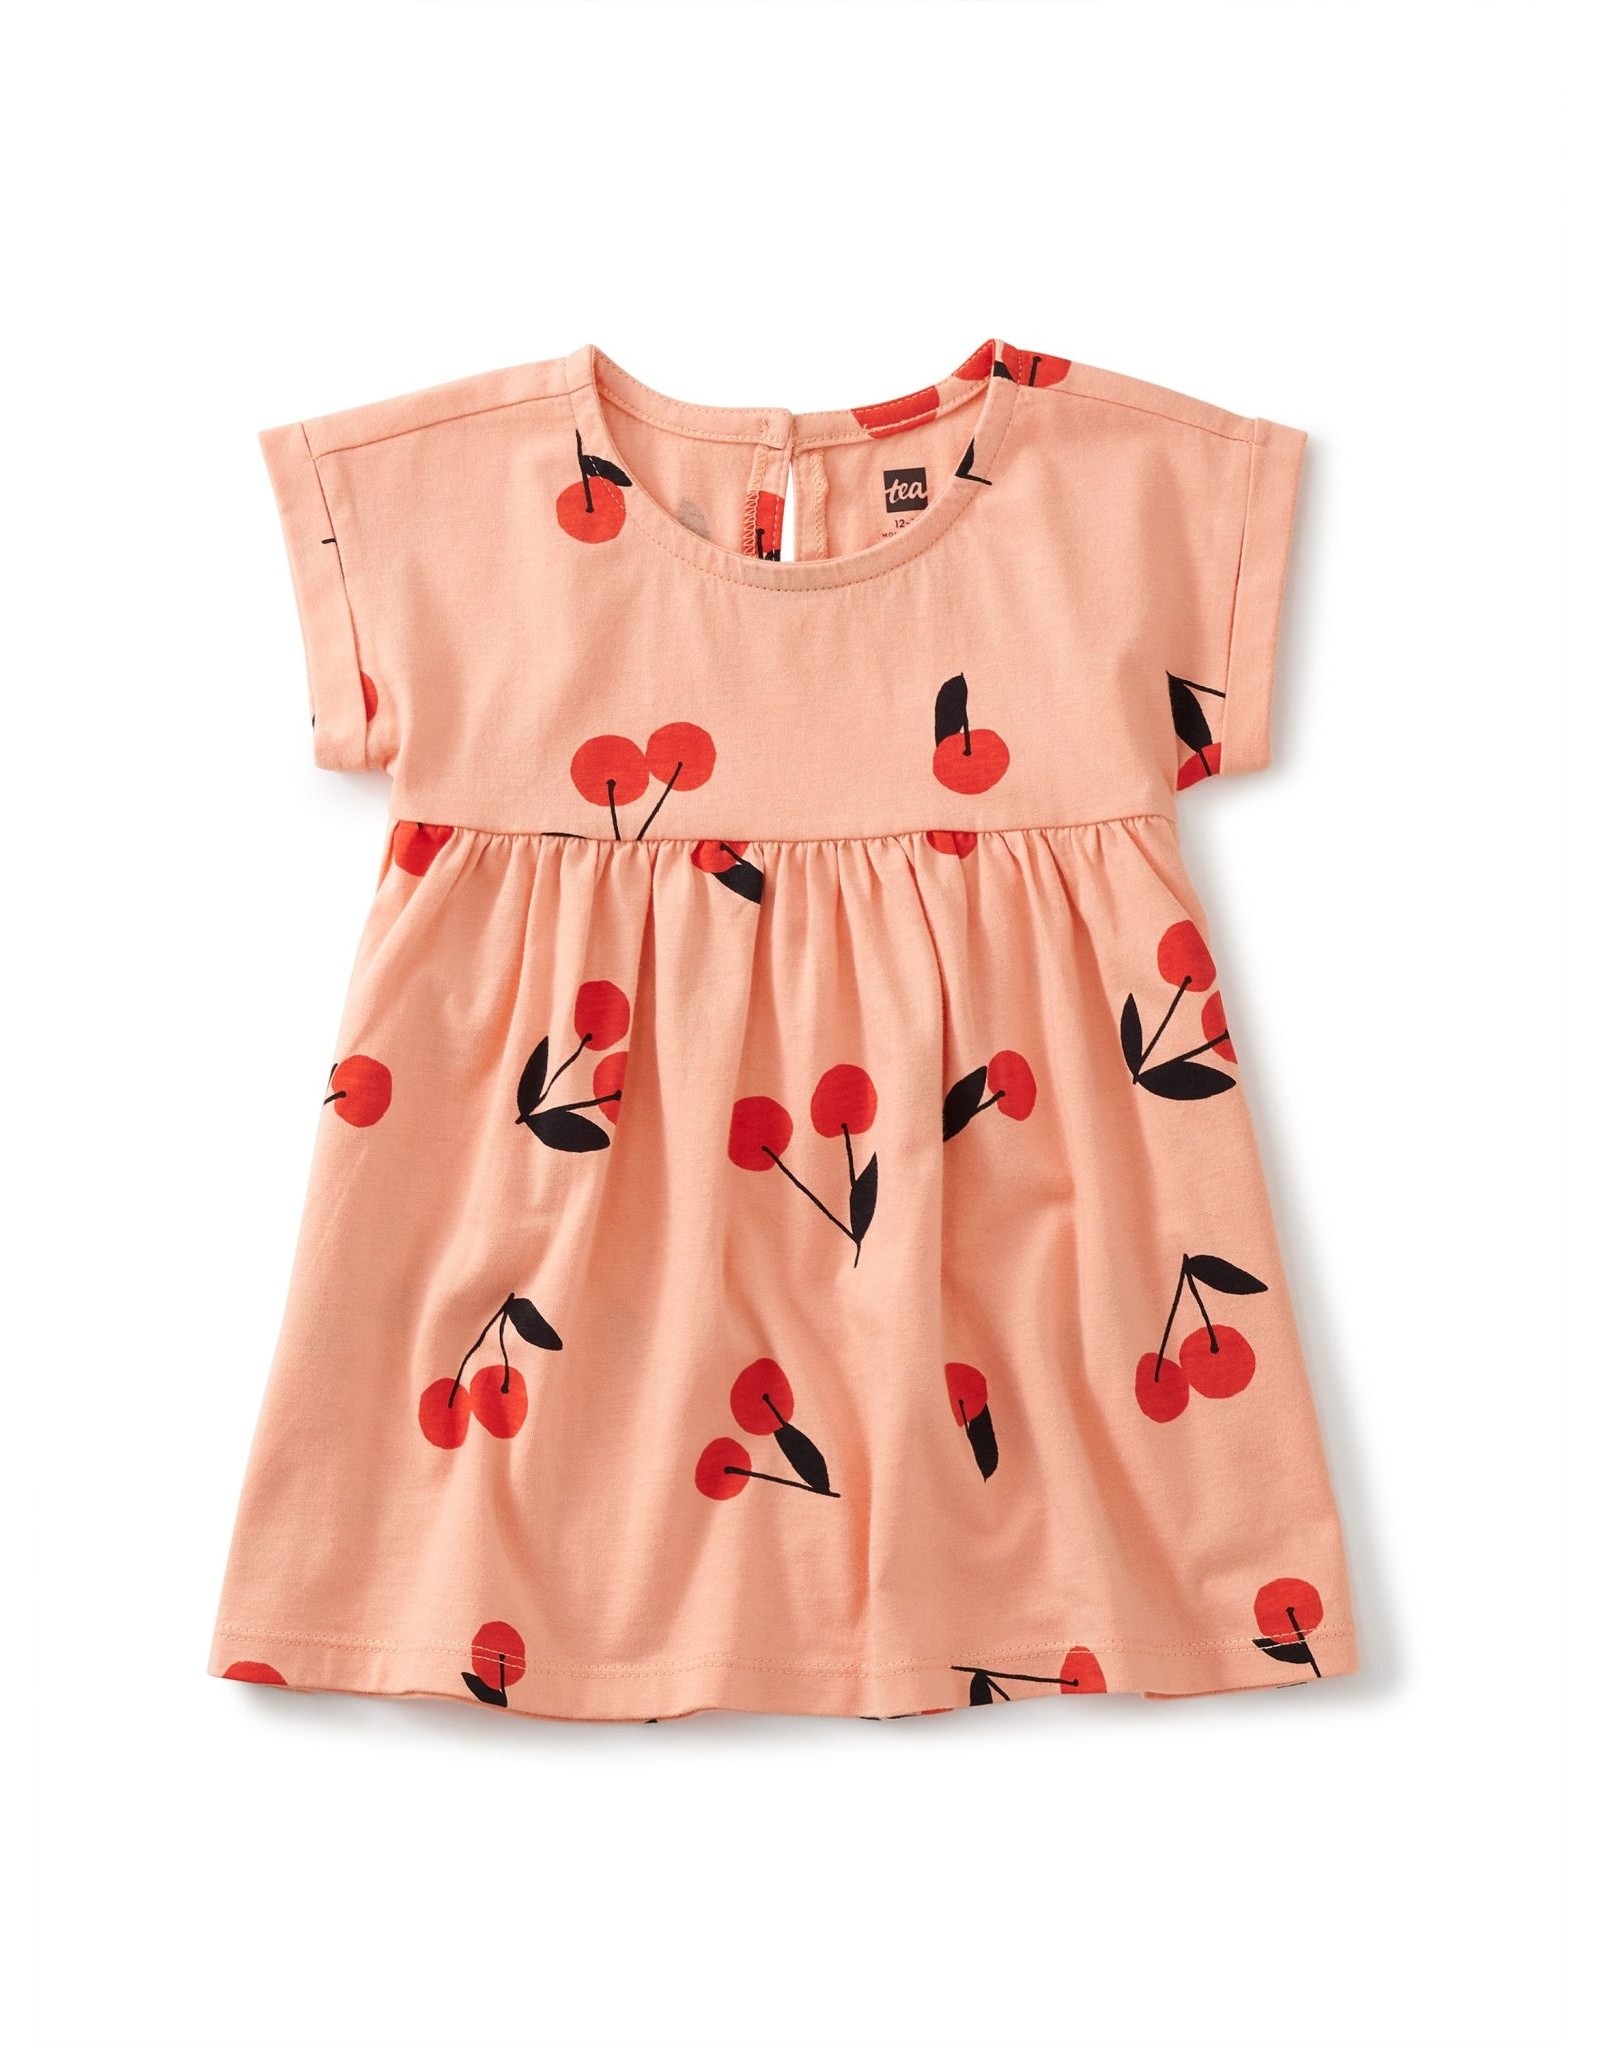 Tea Collection Empire Baby Dress - Cherry Toss in Pink